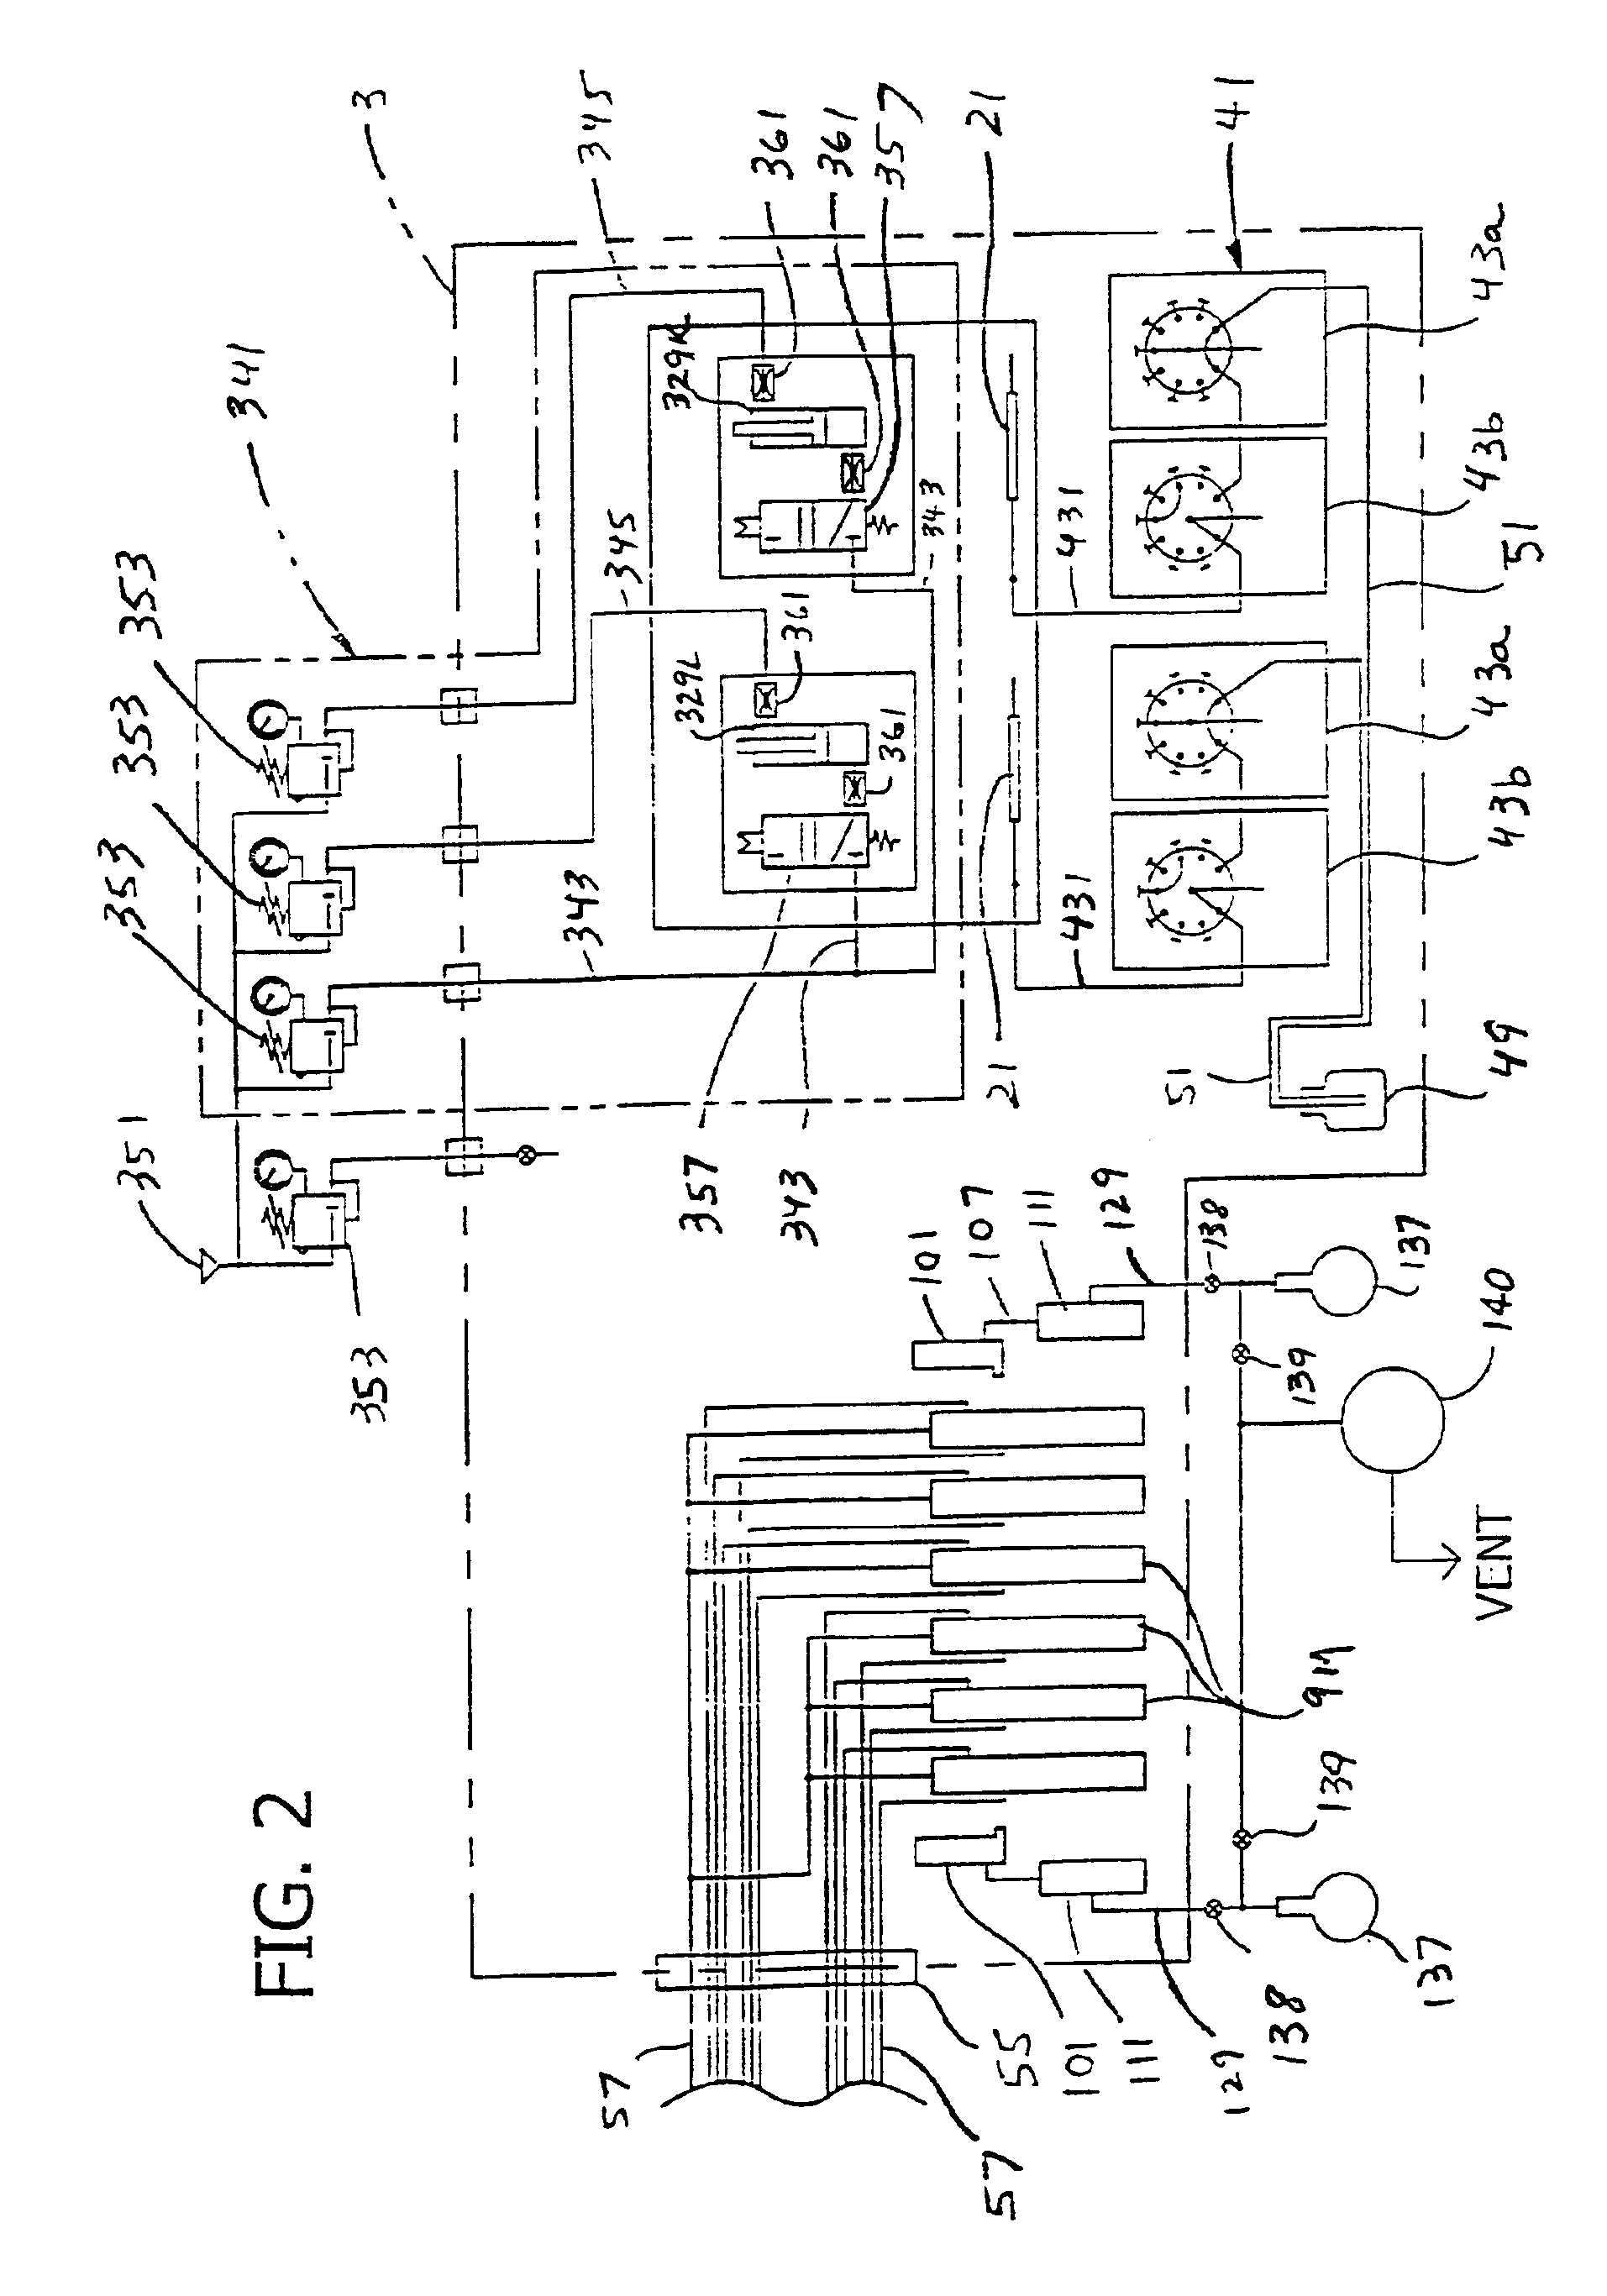 Apparatus and methods for parallel processing of multiple reaction mixtures